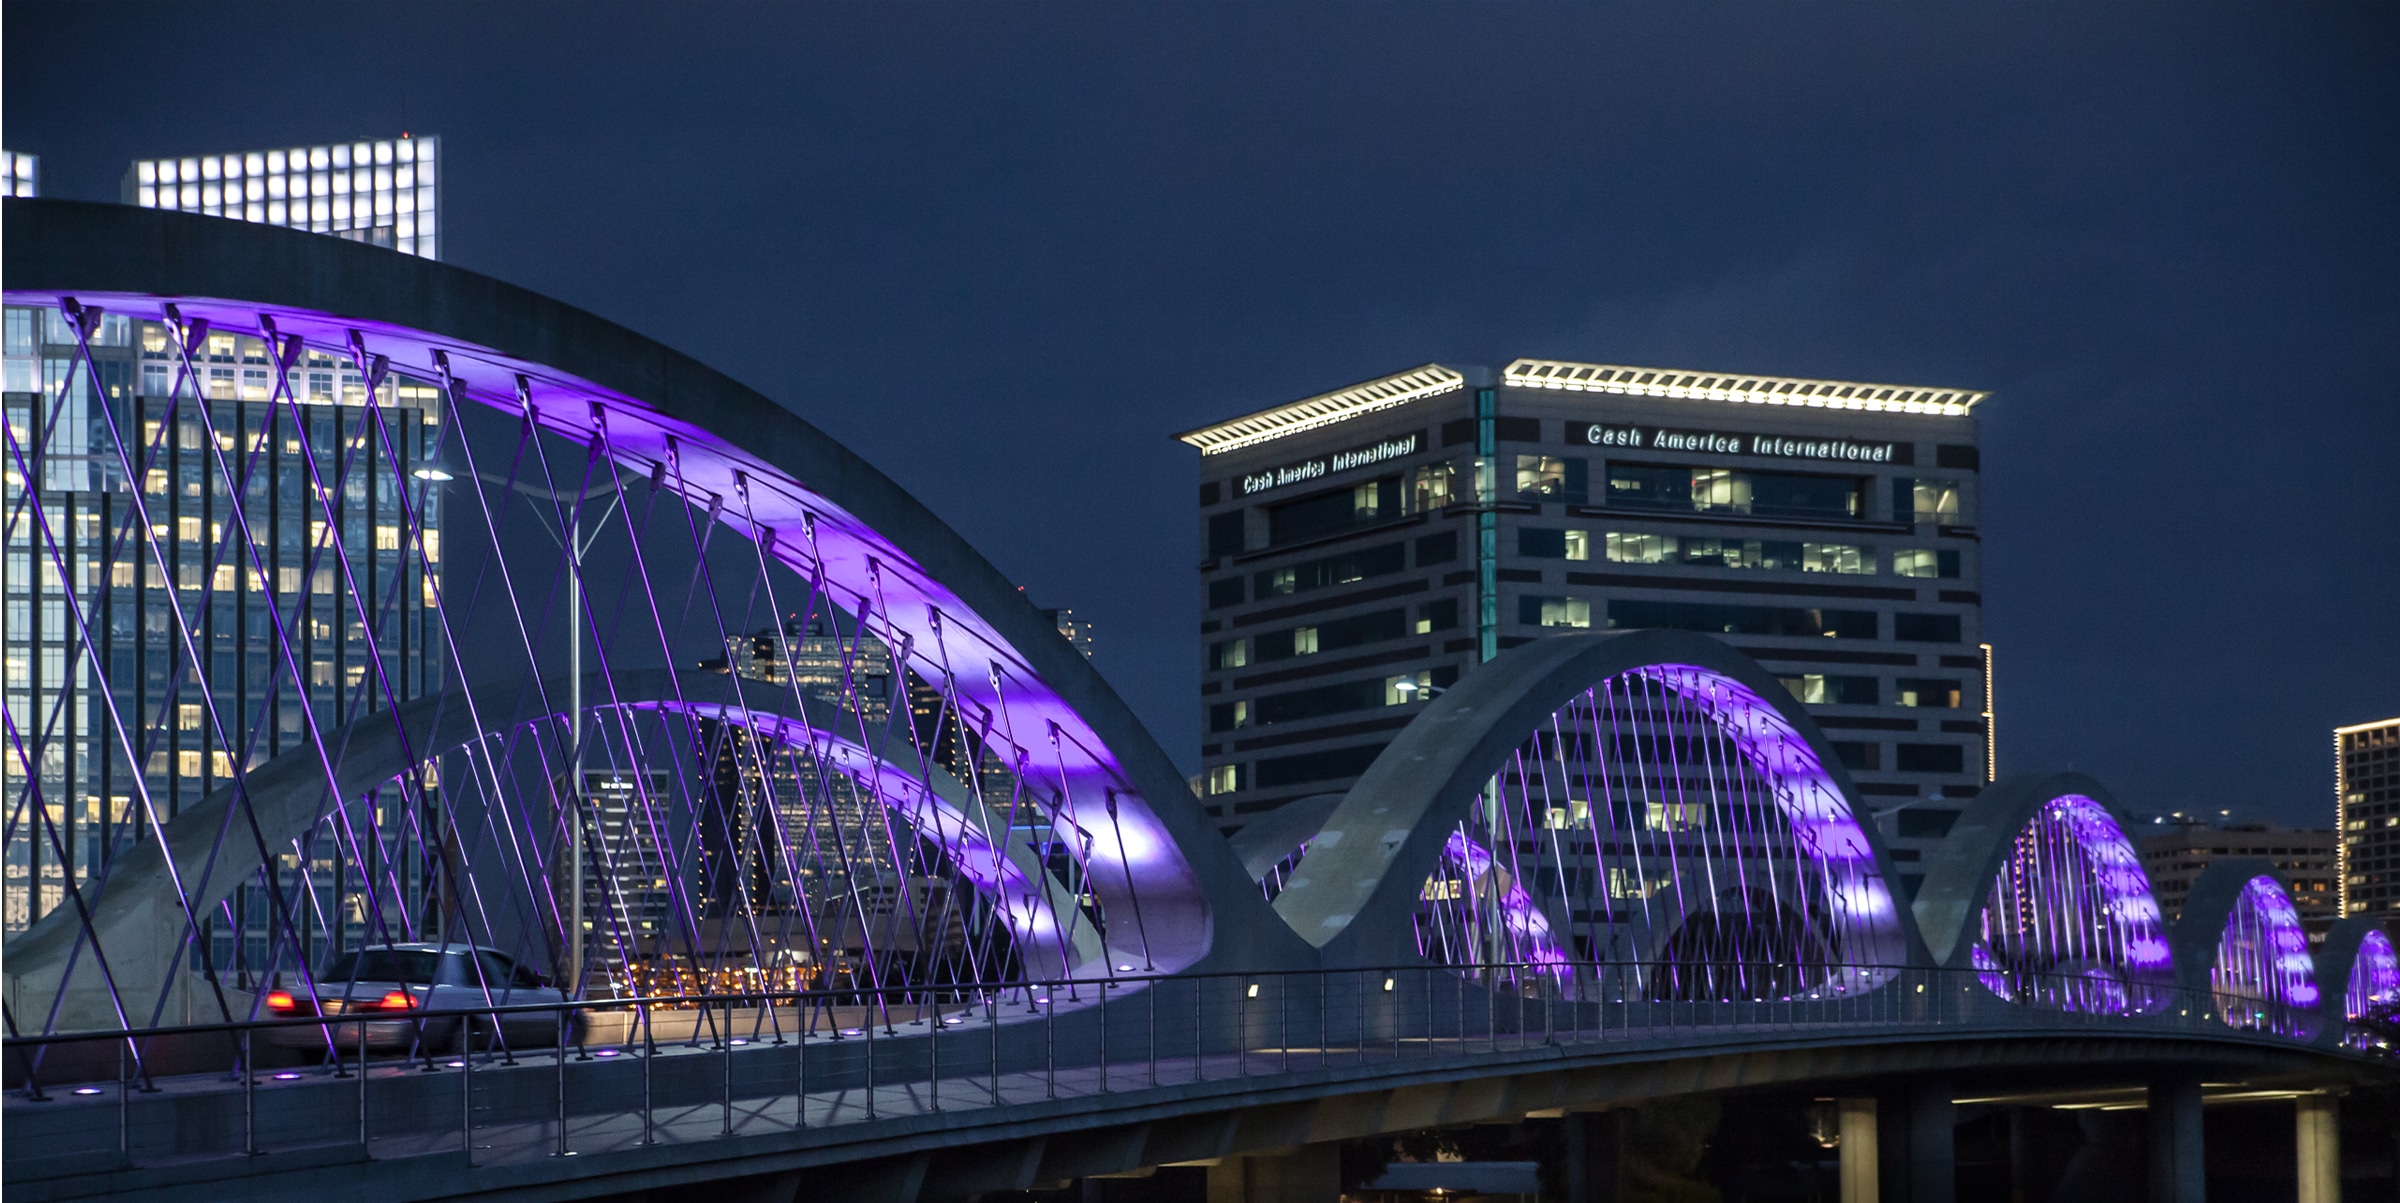 Casestudy Galleryimage Bridge 7 - WLS Lighting Systems